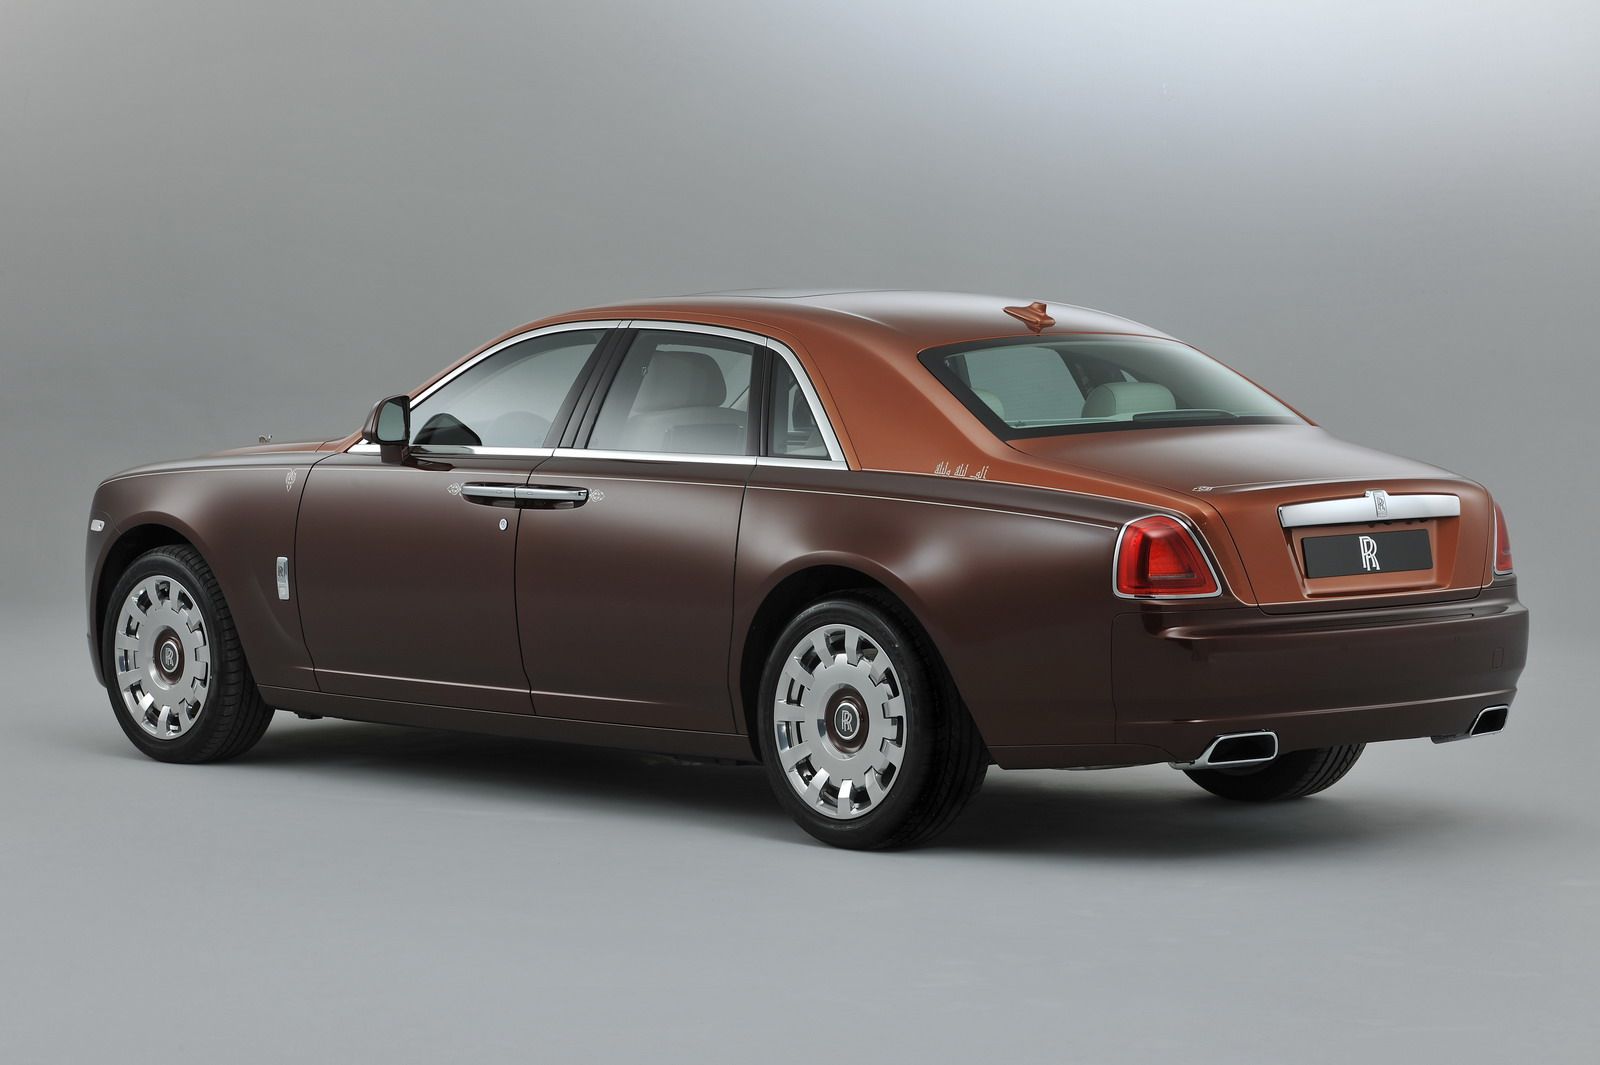 2013 Rolls Royce Ghost One Thousand and One Nights Edition